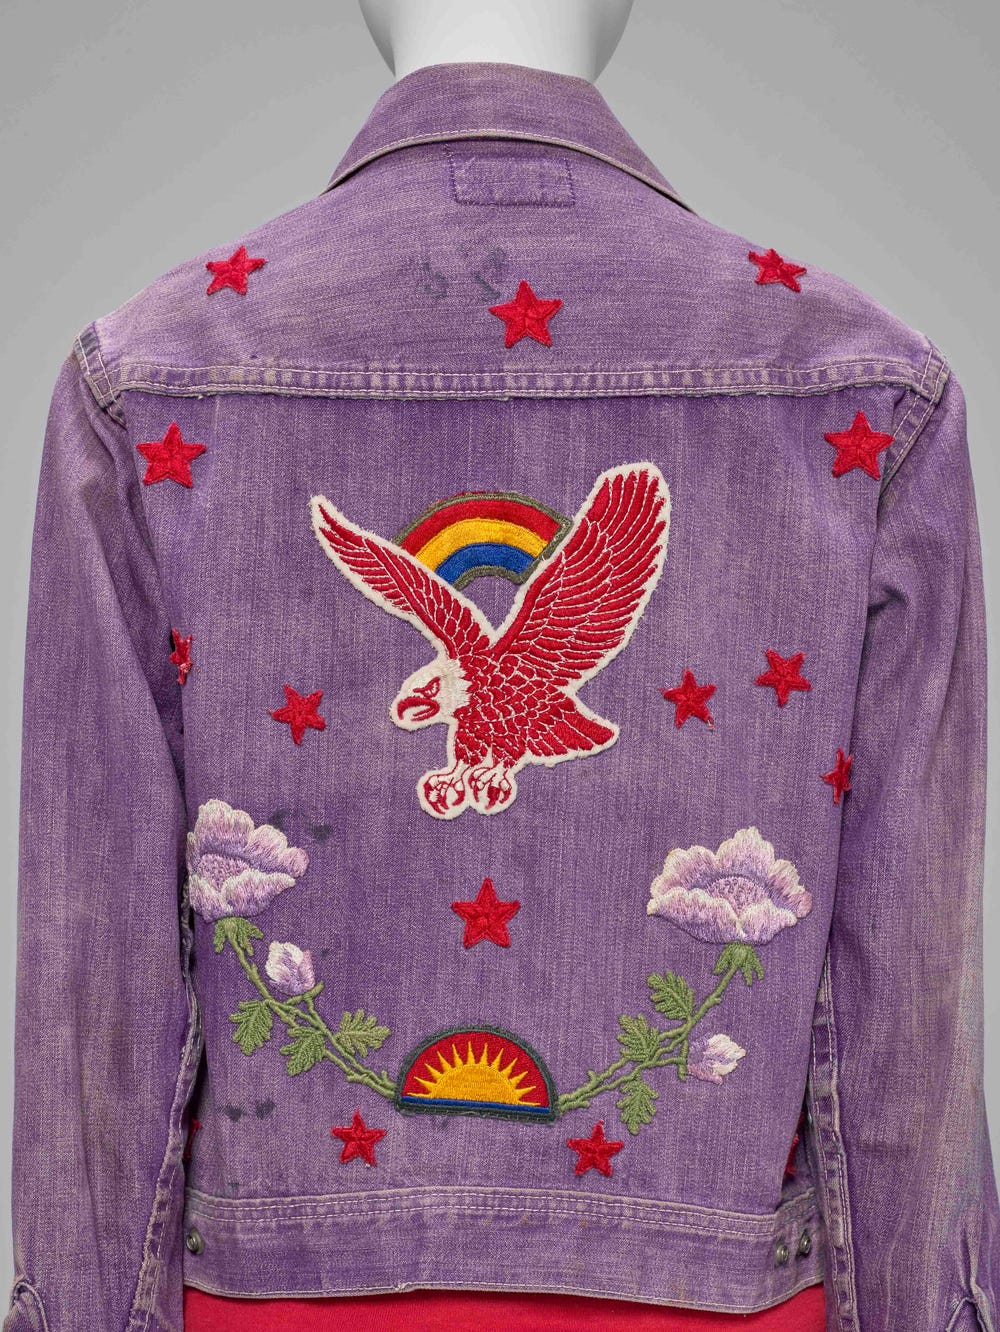 purple jean jacket with patches